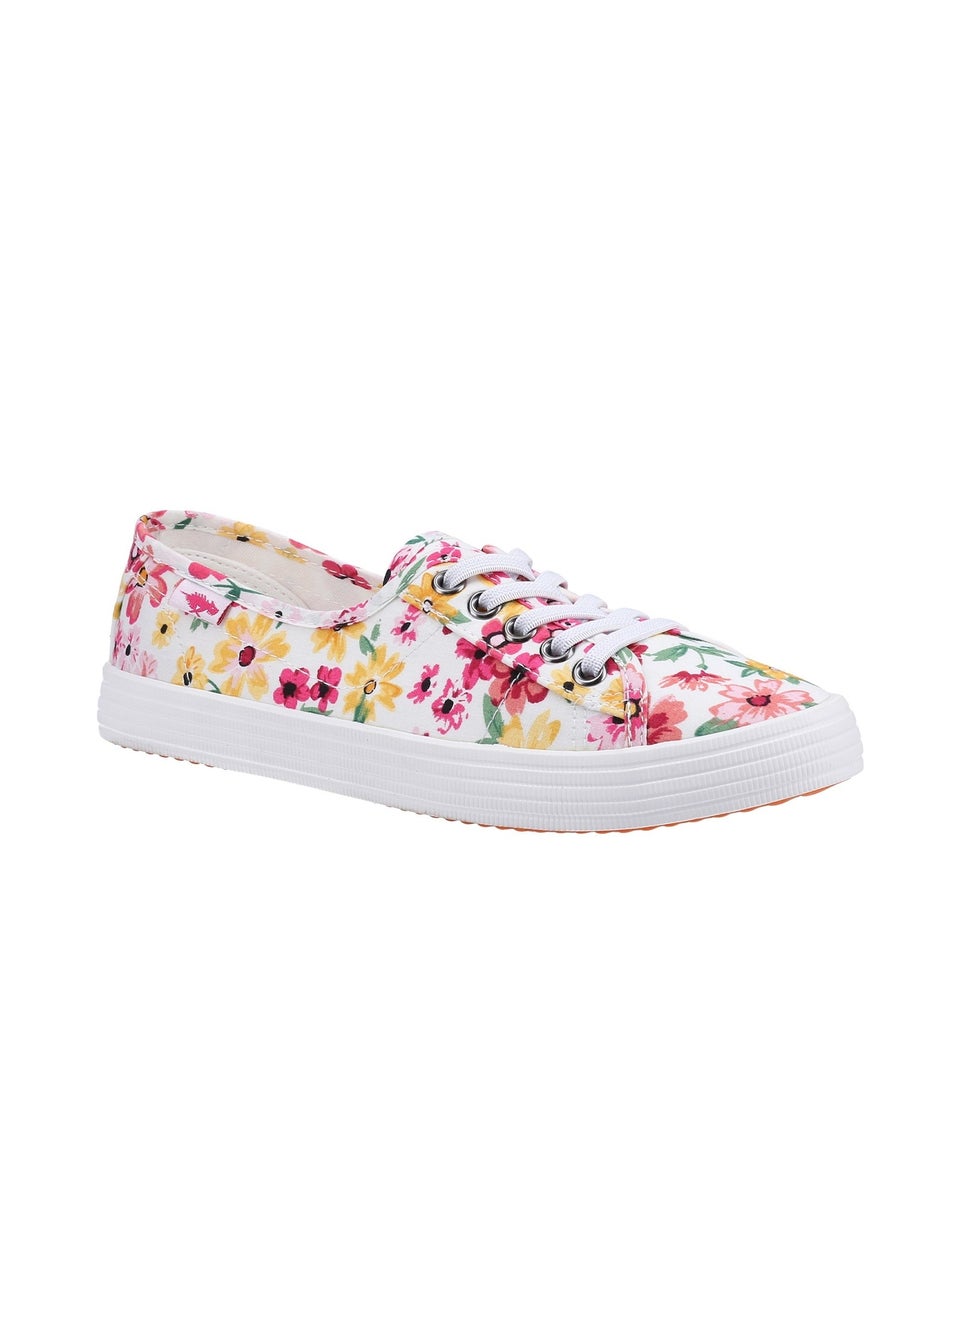 Rocket Dog White Chow Chow Margate Floral Casual Shoe